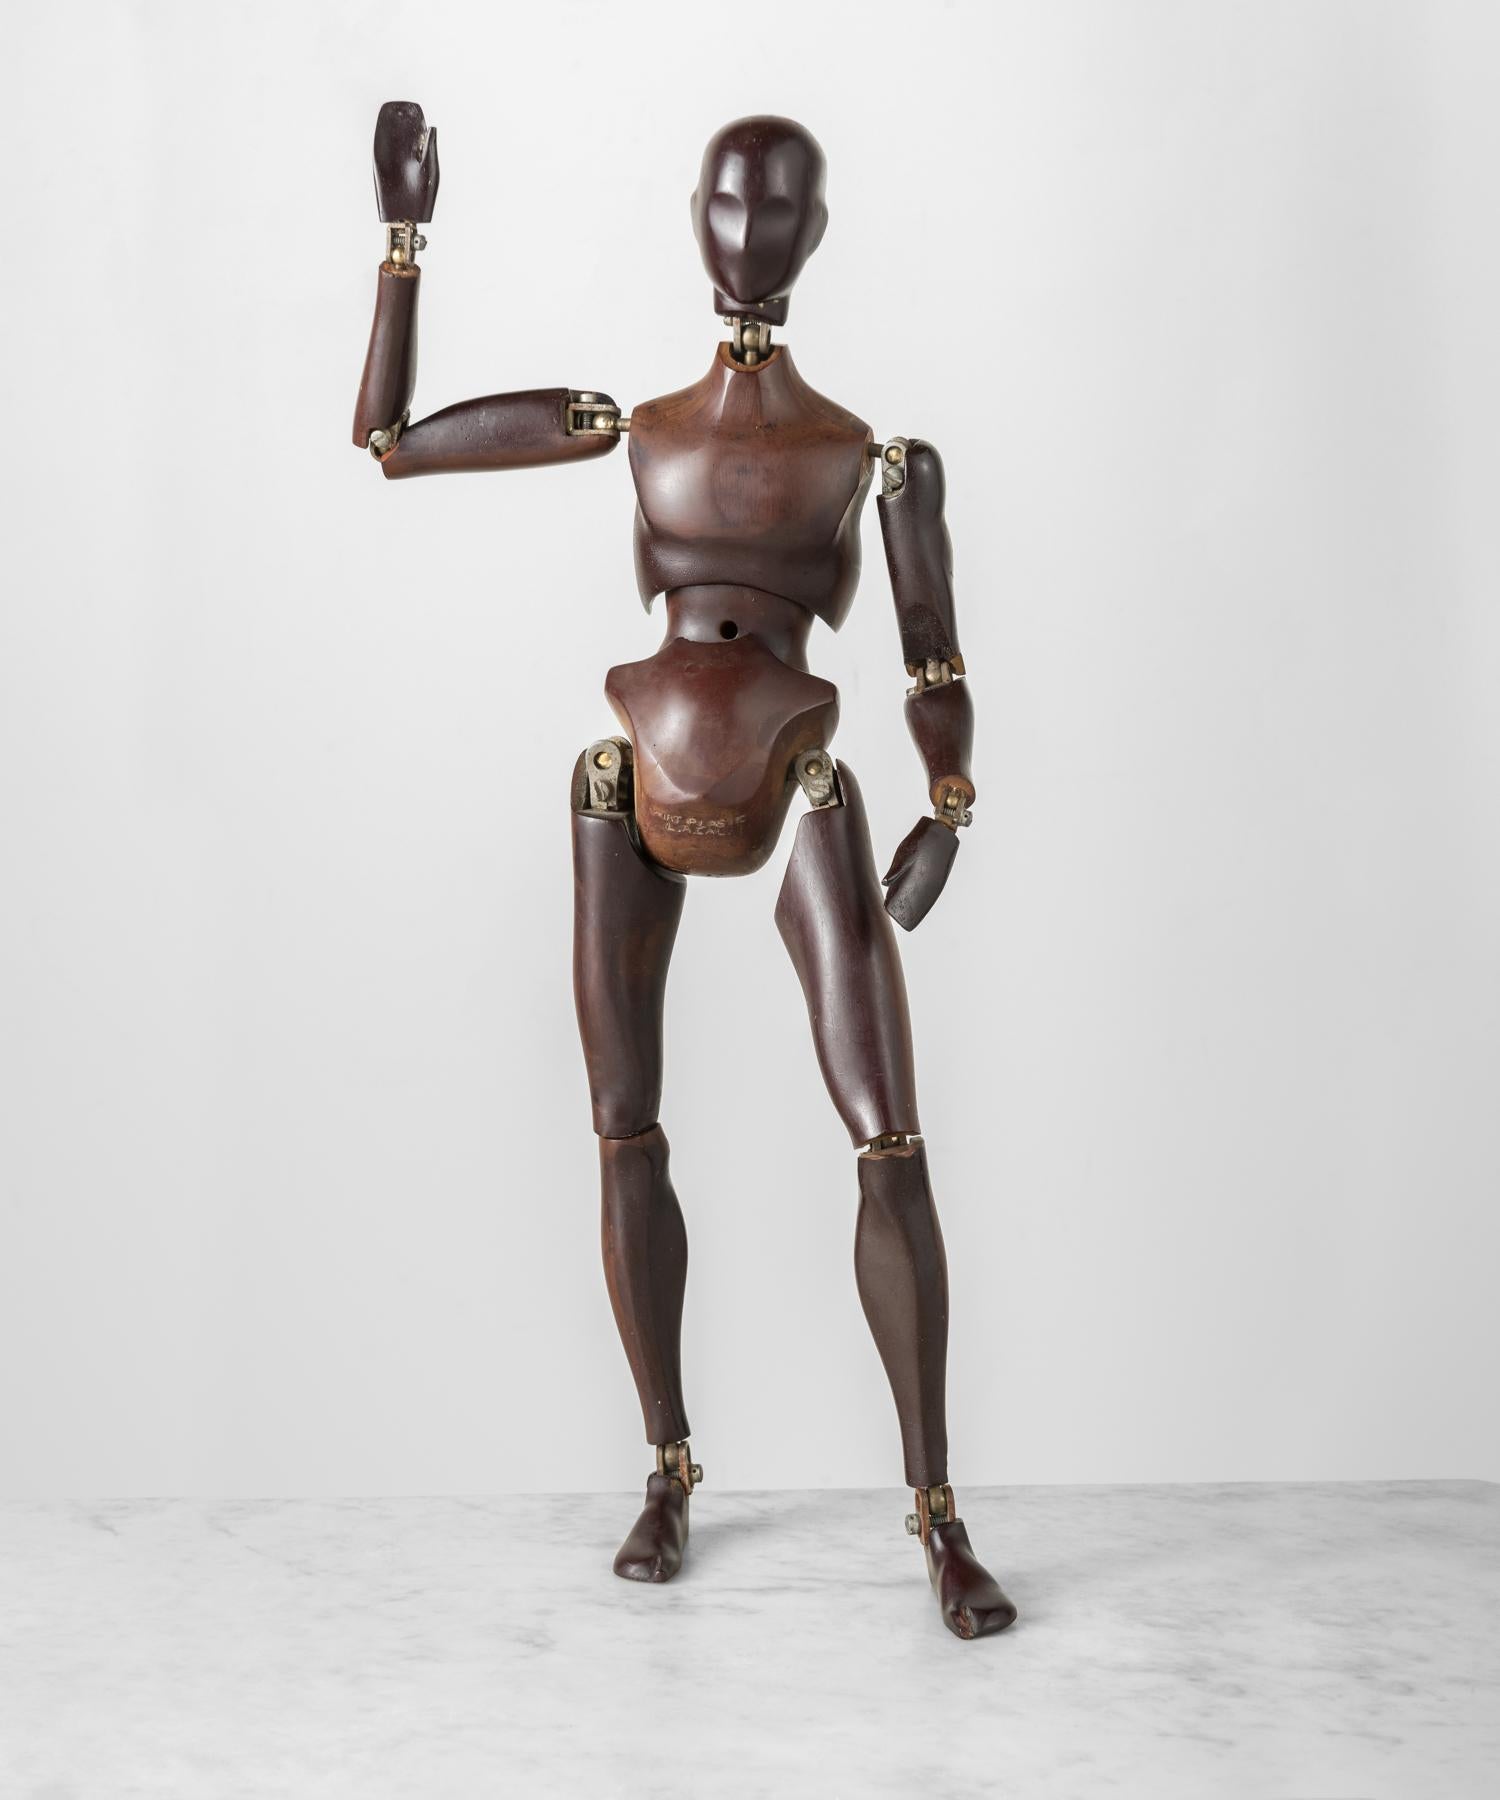 Atsco “Oscar” Artist Mannequin

Molded bakelite limbs and machined steel screws and joints. Amazing flexibility and articulation. 

Made in Los Angeles, CA, circa 1930.

    